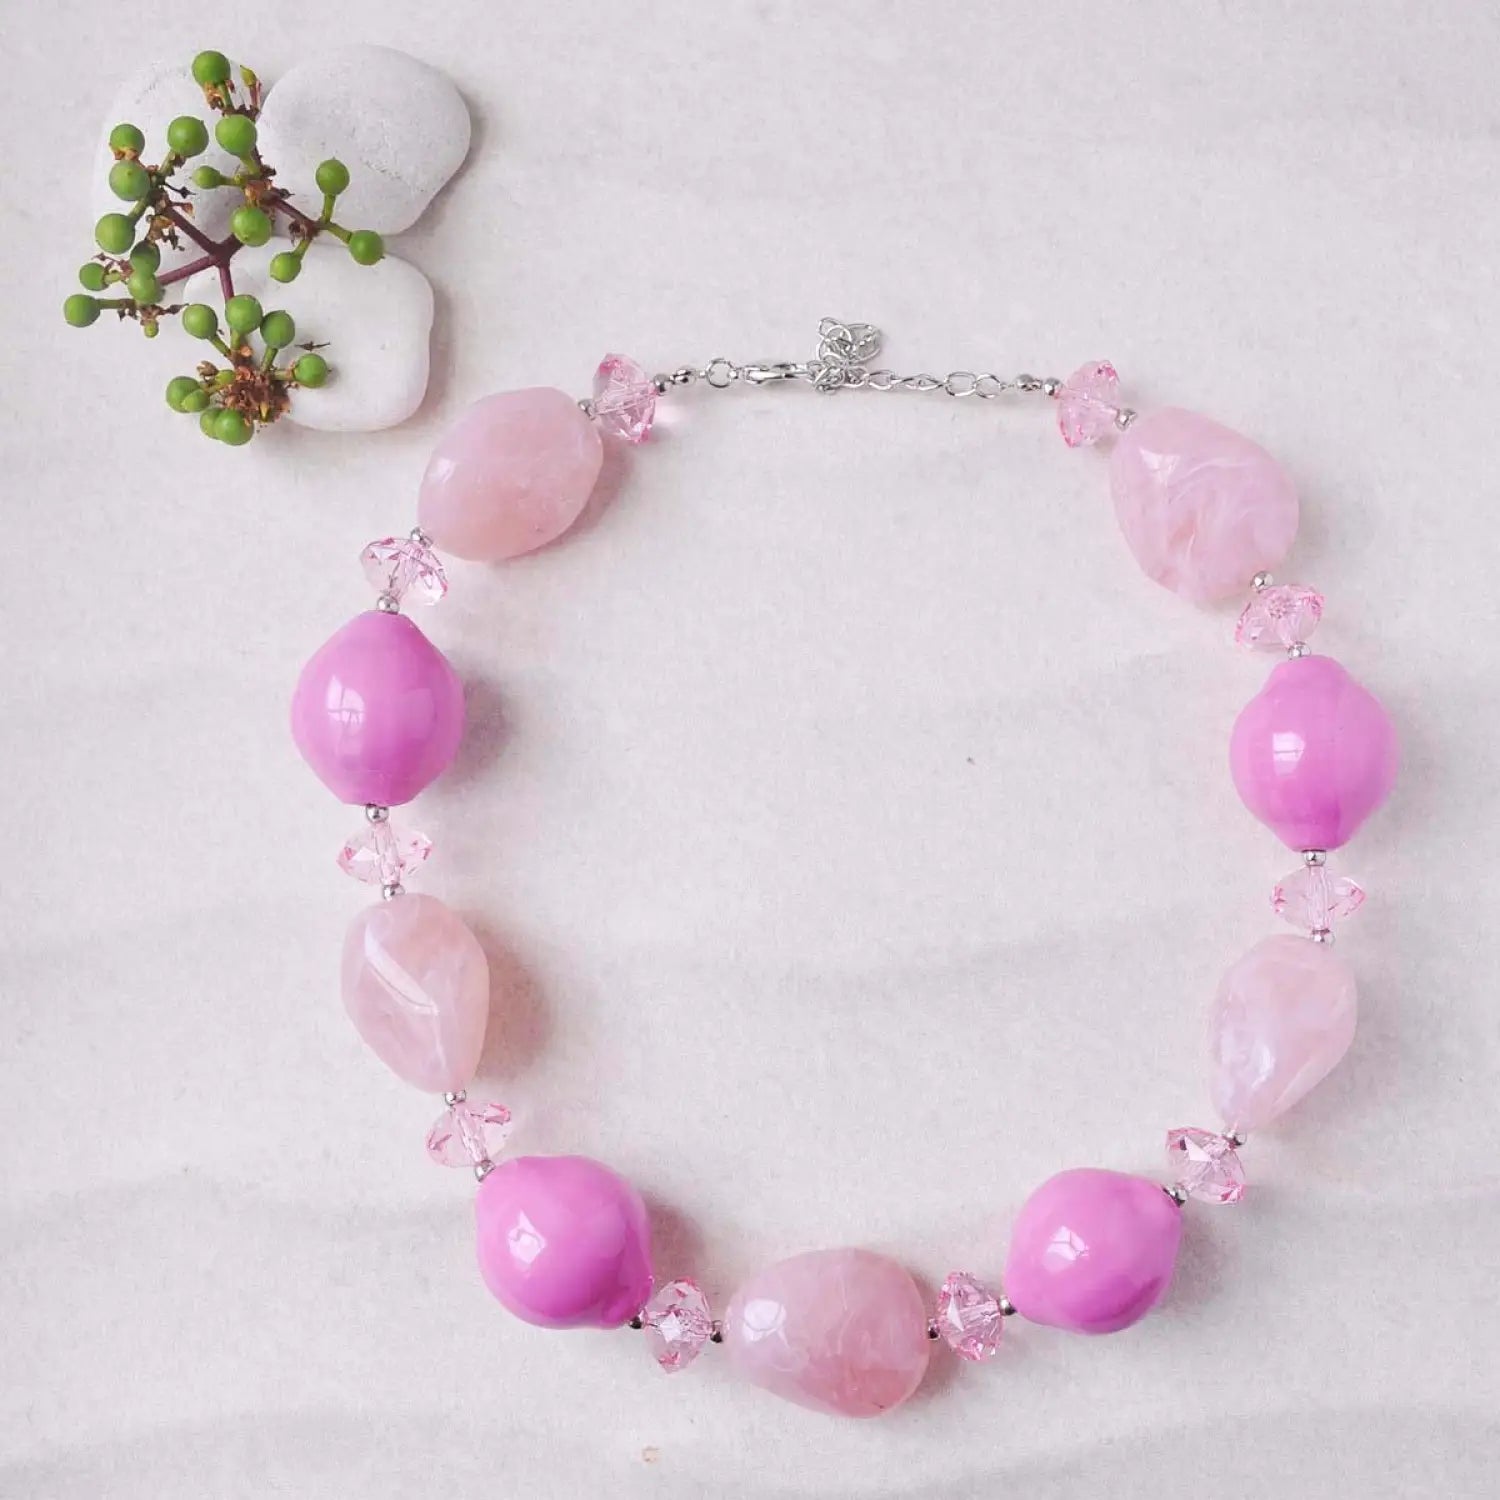 Chunky Beads Statement Necklace with Pink Beads and Crystals